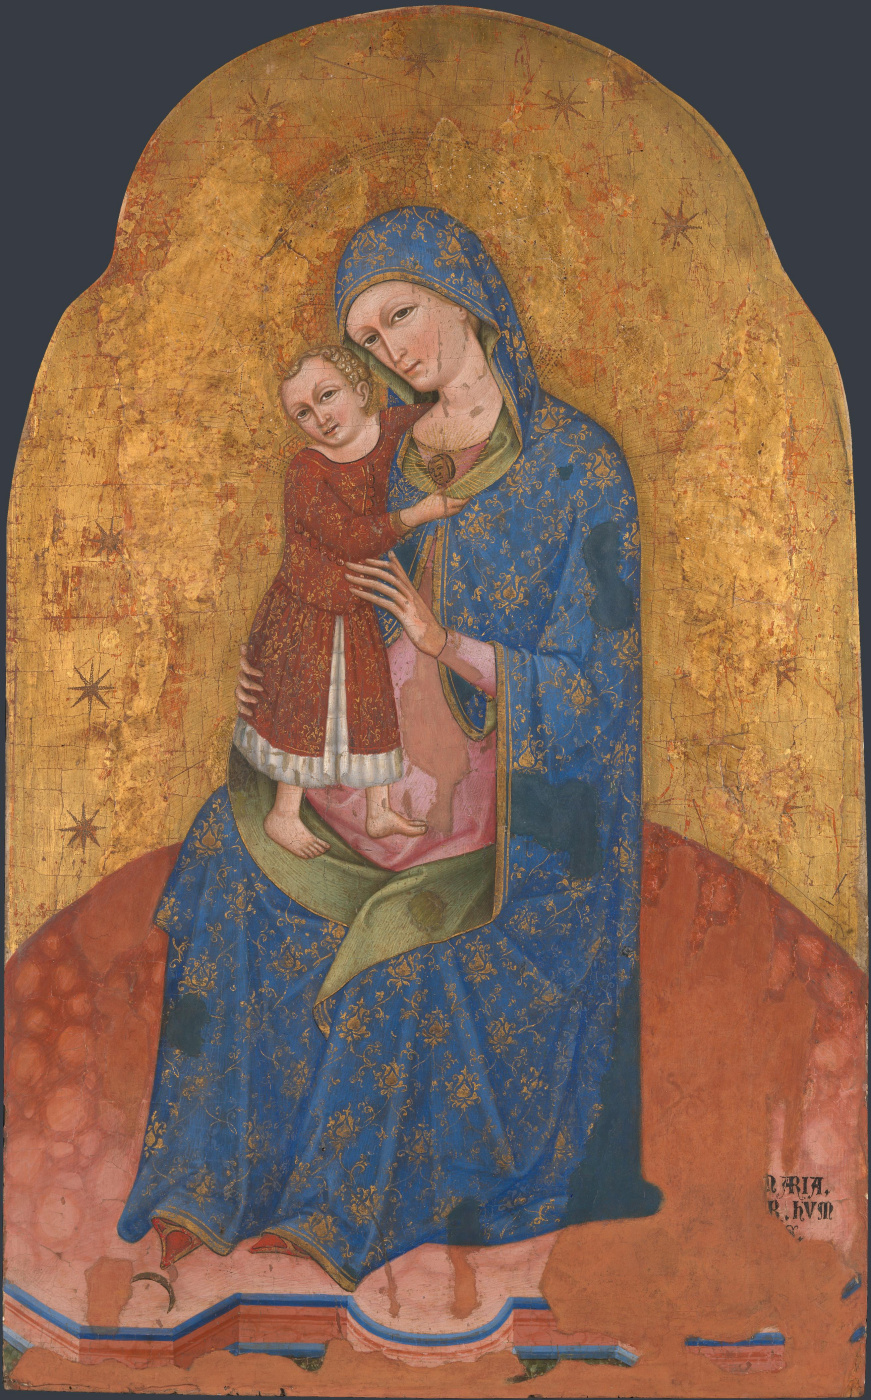 Dalmatian. The virgin with the child